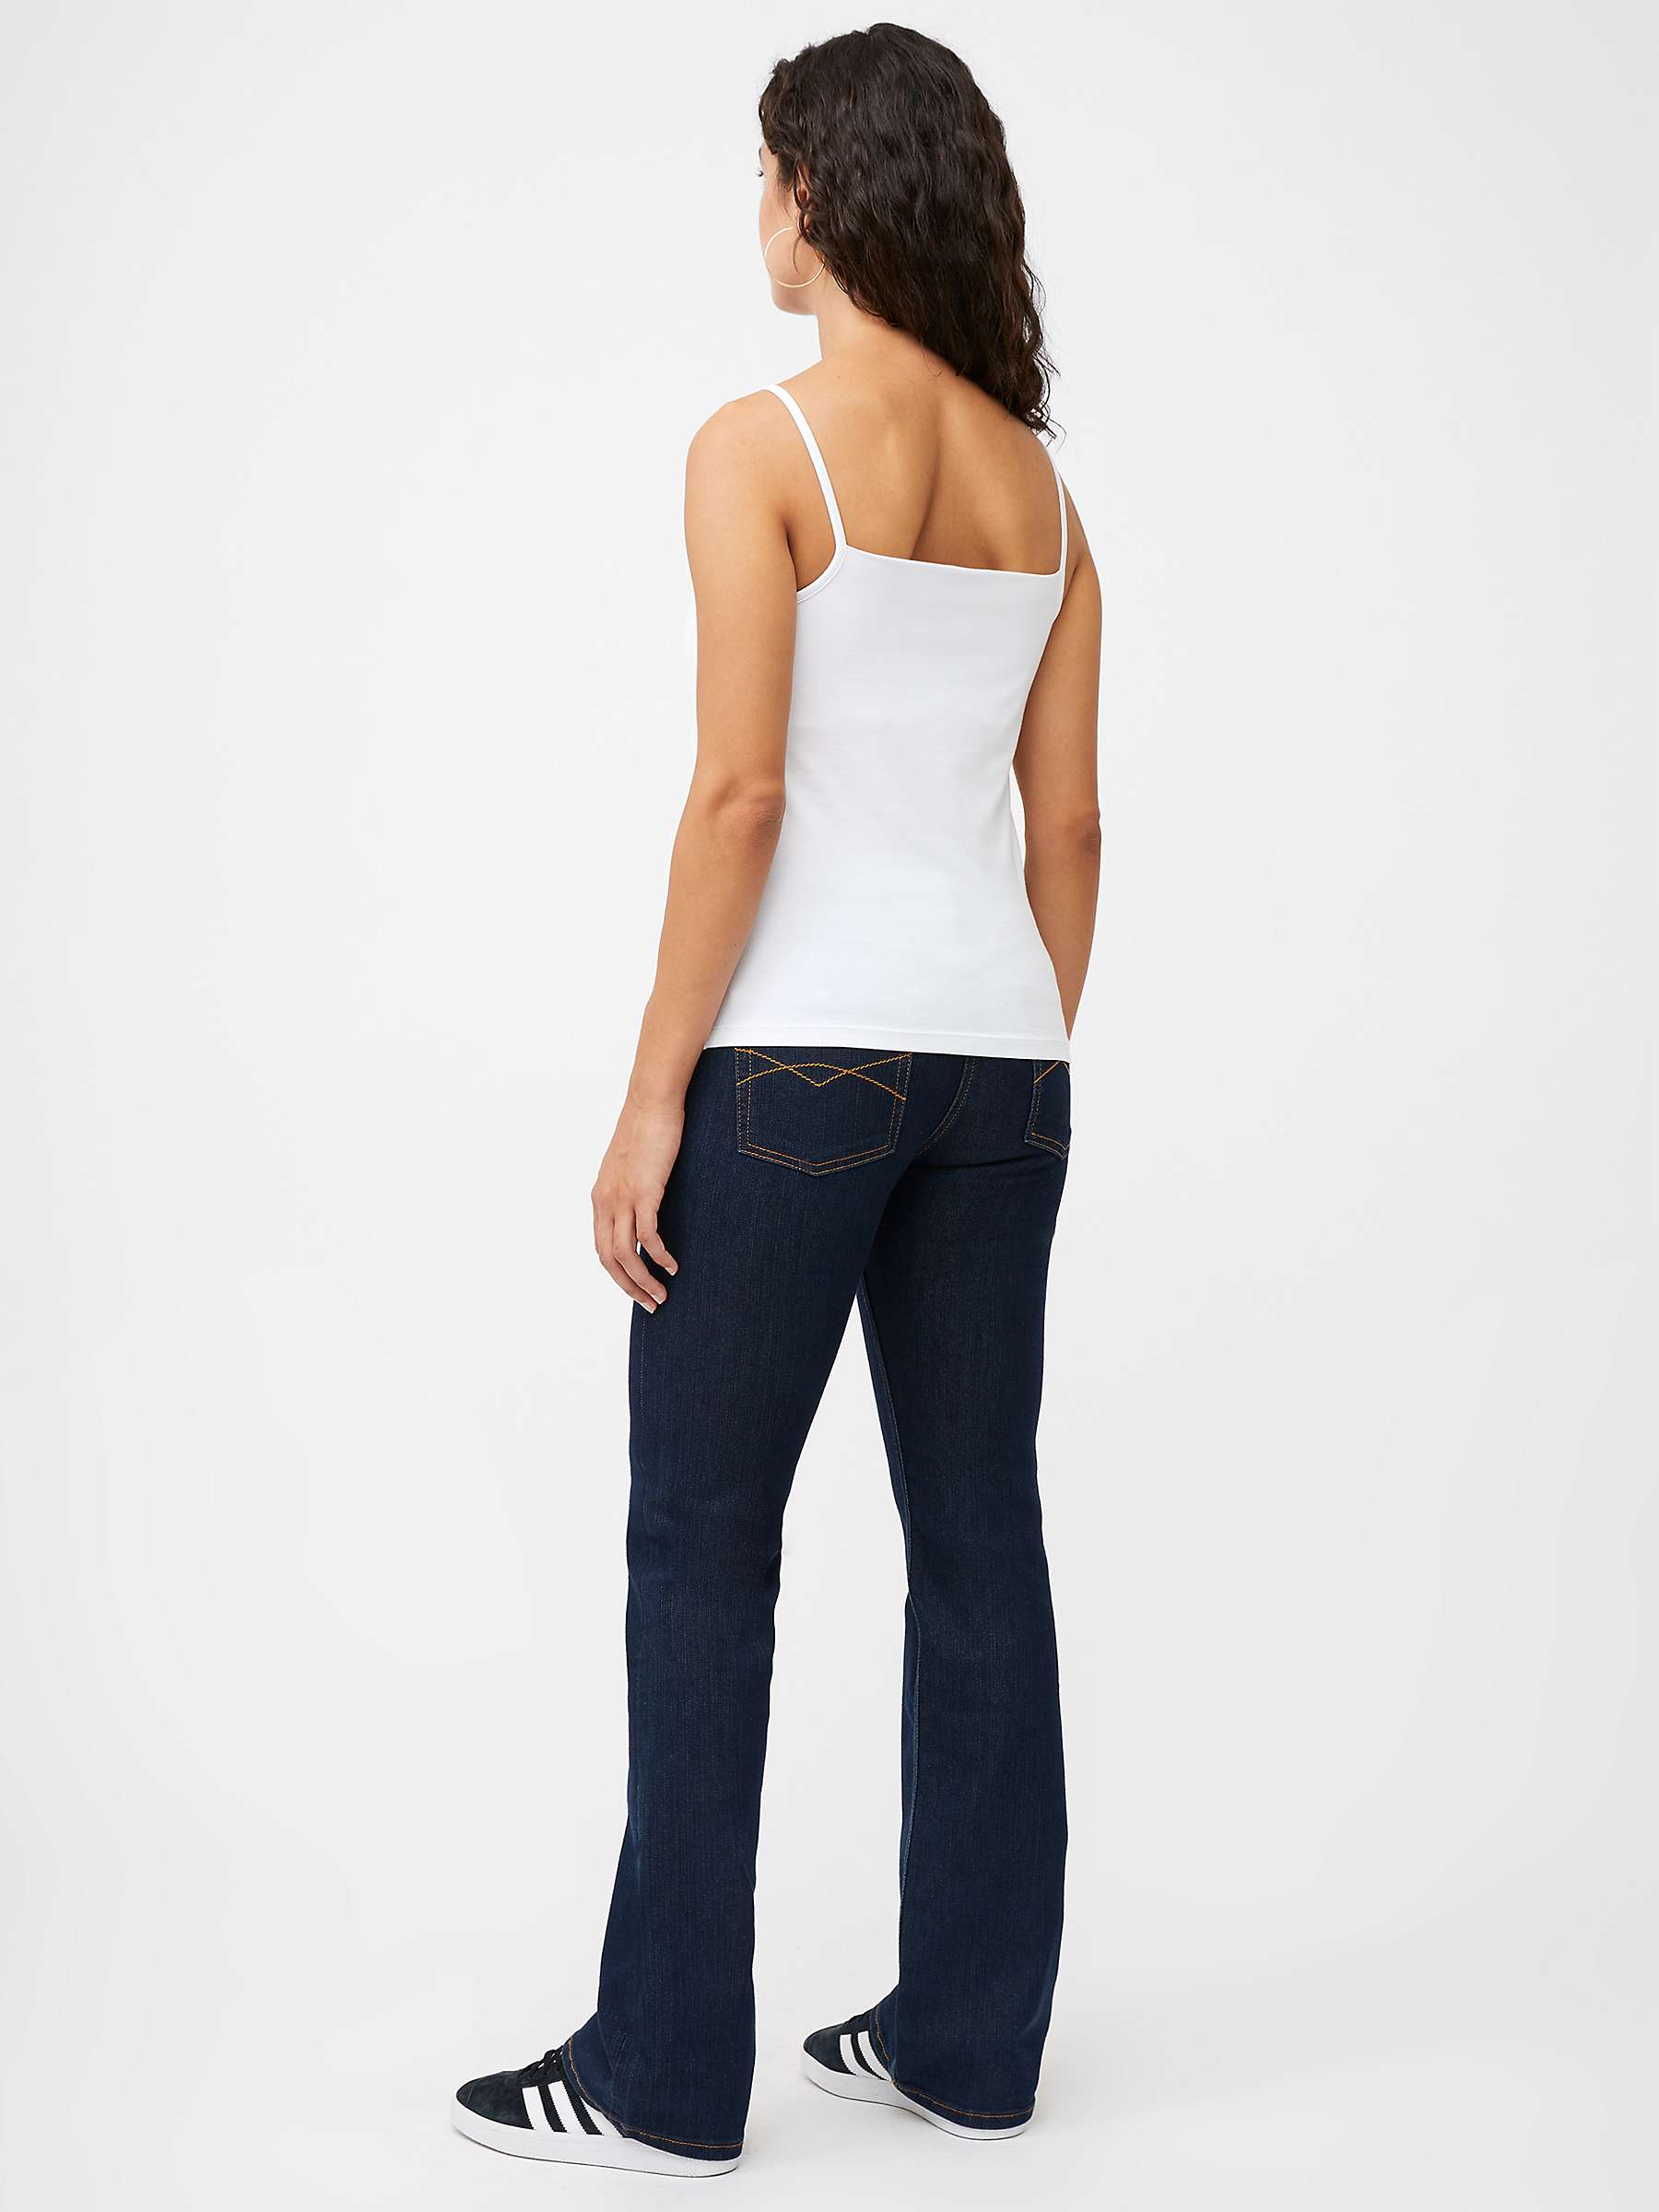 Buy Great Plains Organic Cotton Camisole Online at johnlewis.com